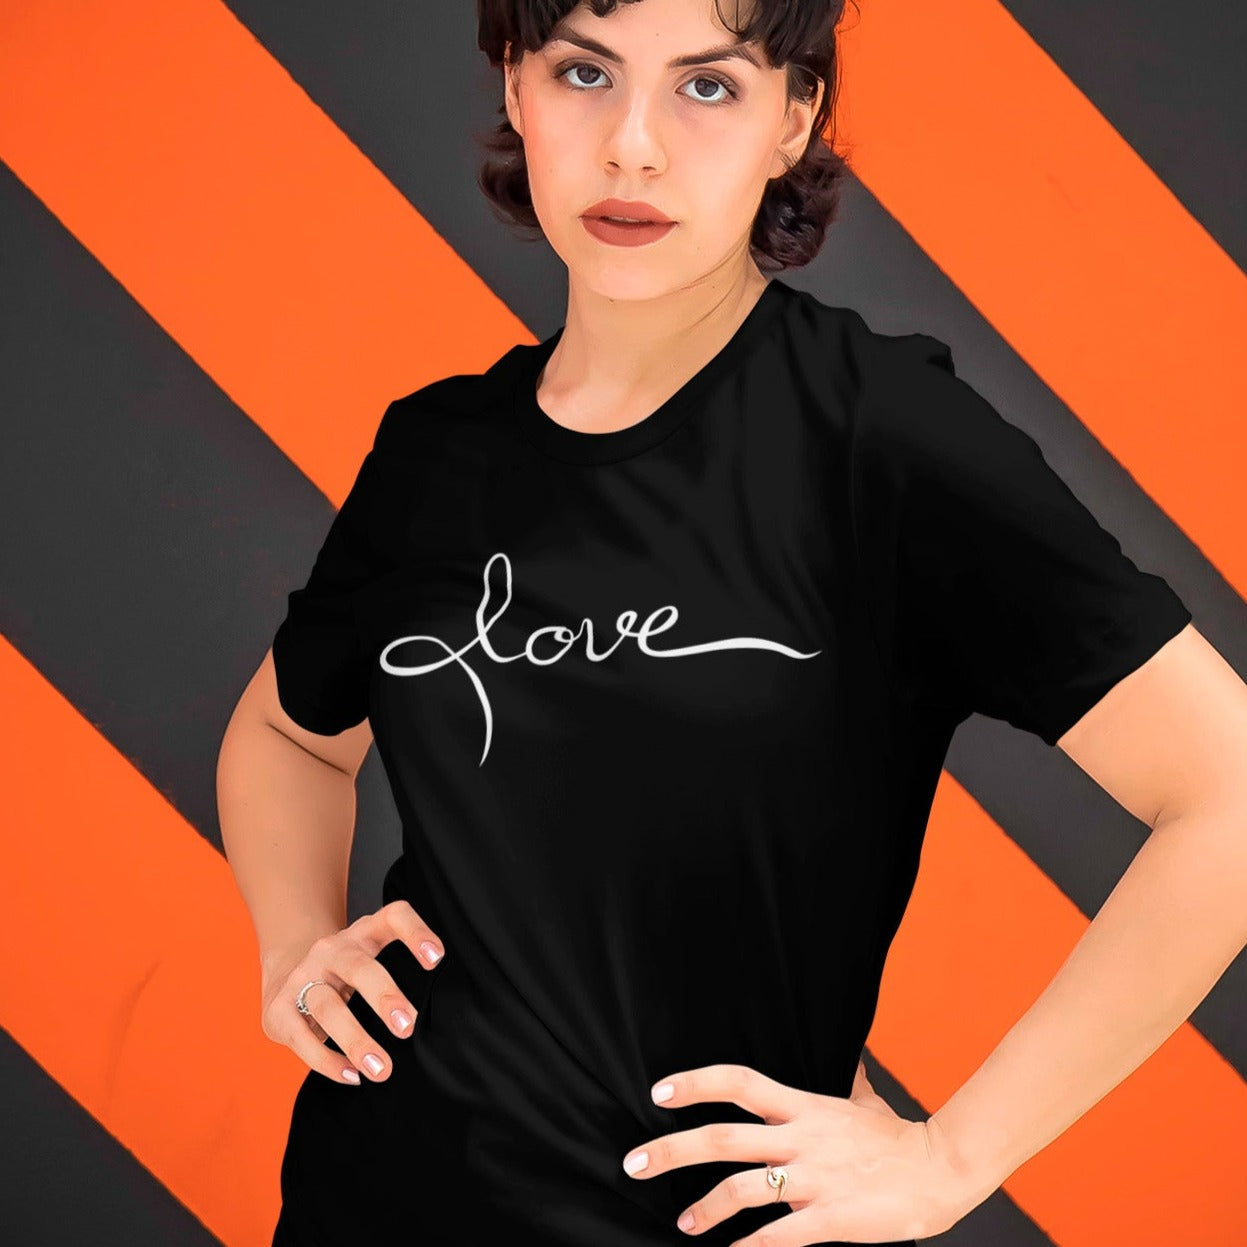 love-black-t-shirt-womens-mockup-featuring-a-woman-standing-in-front-of-a-patterned-wall